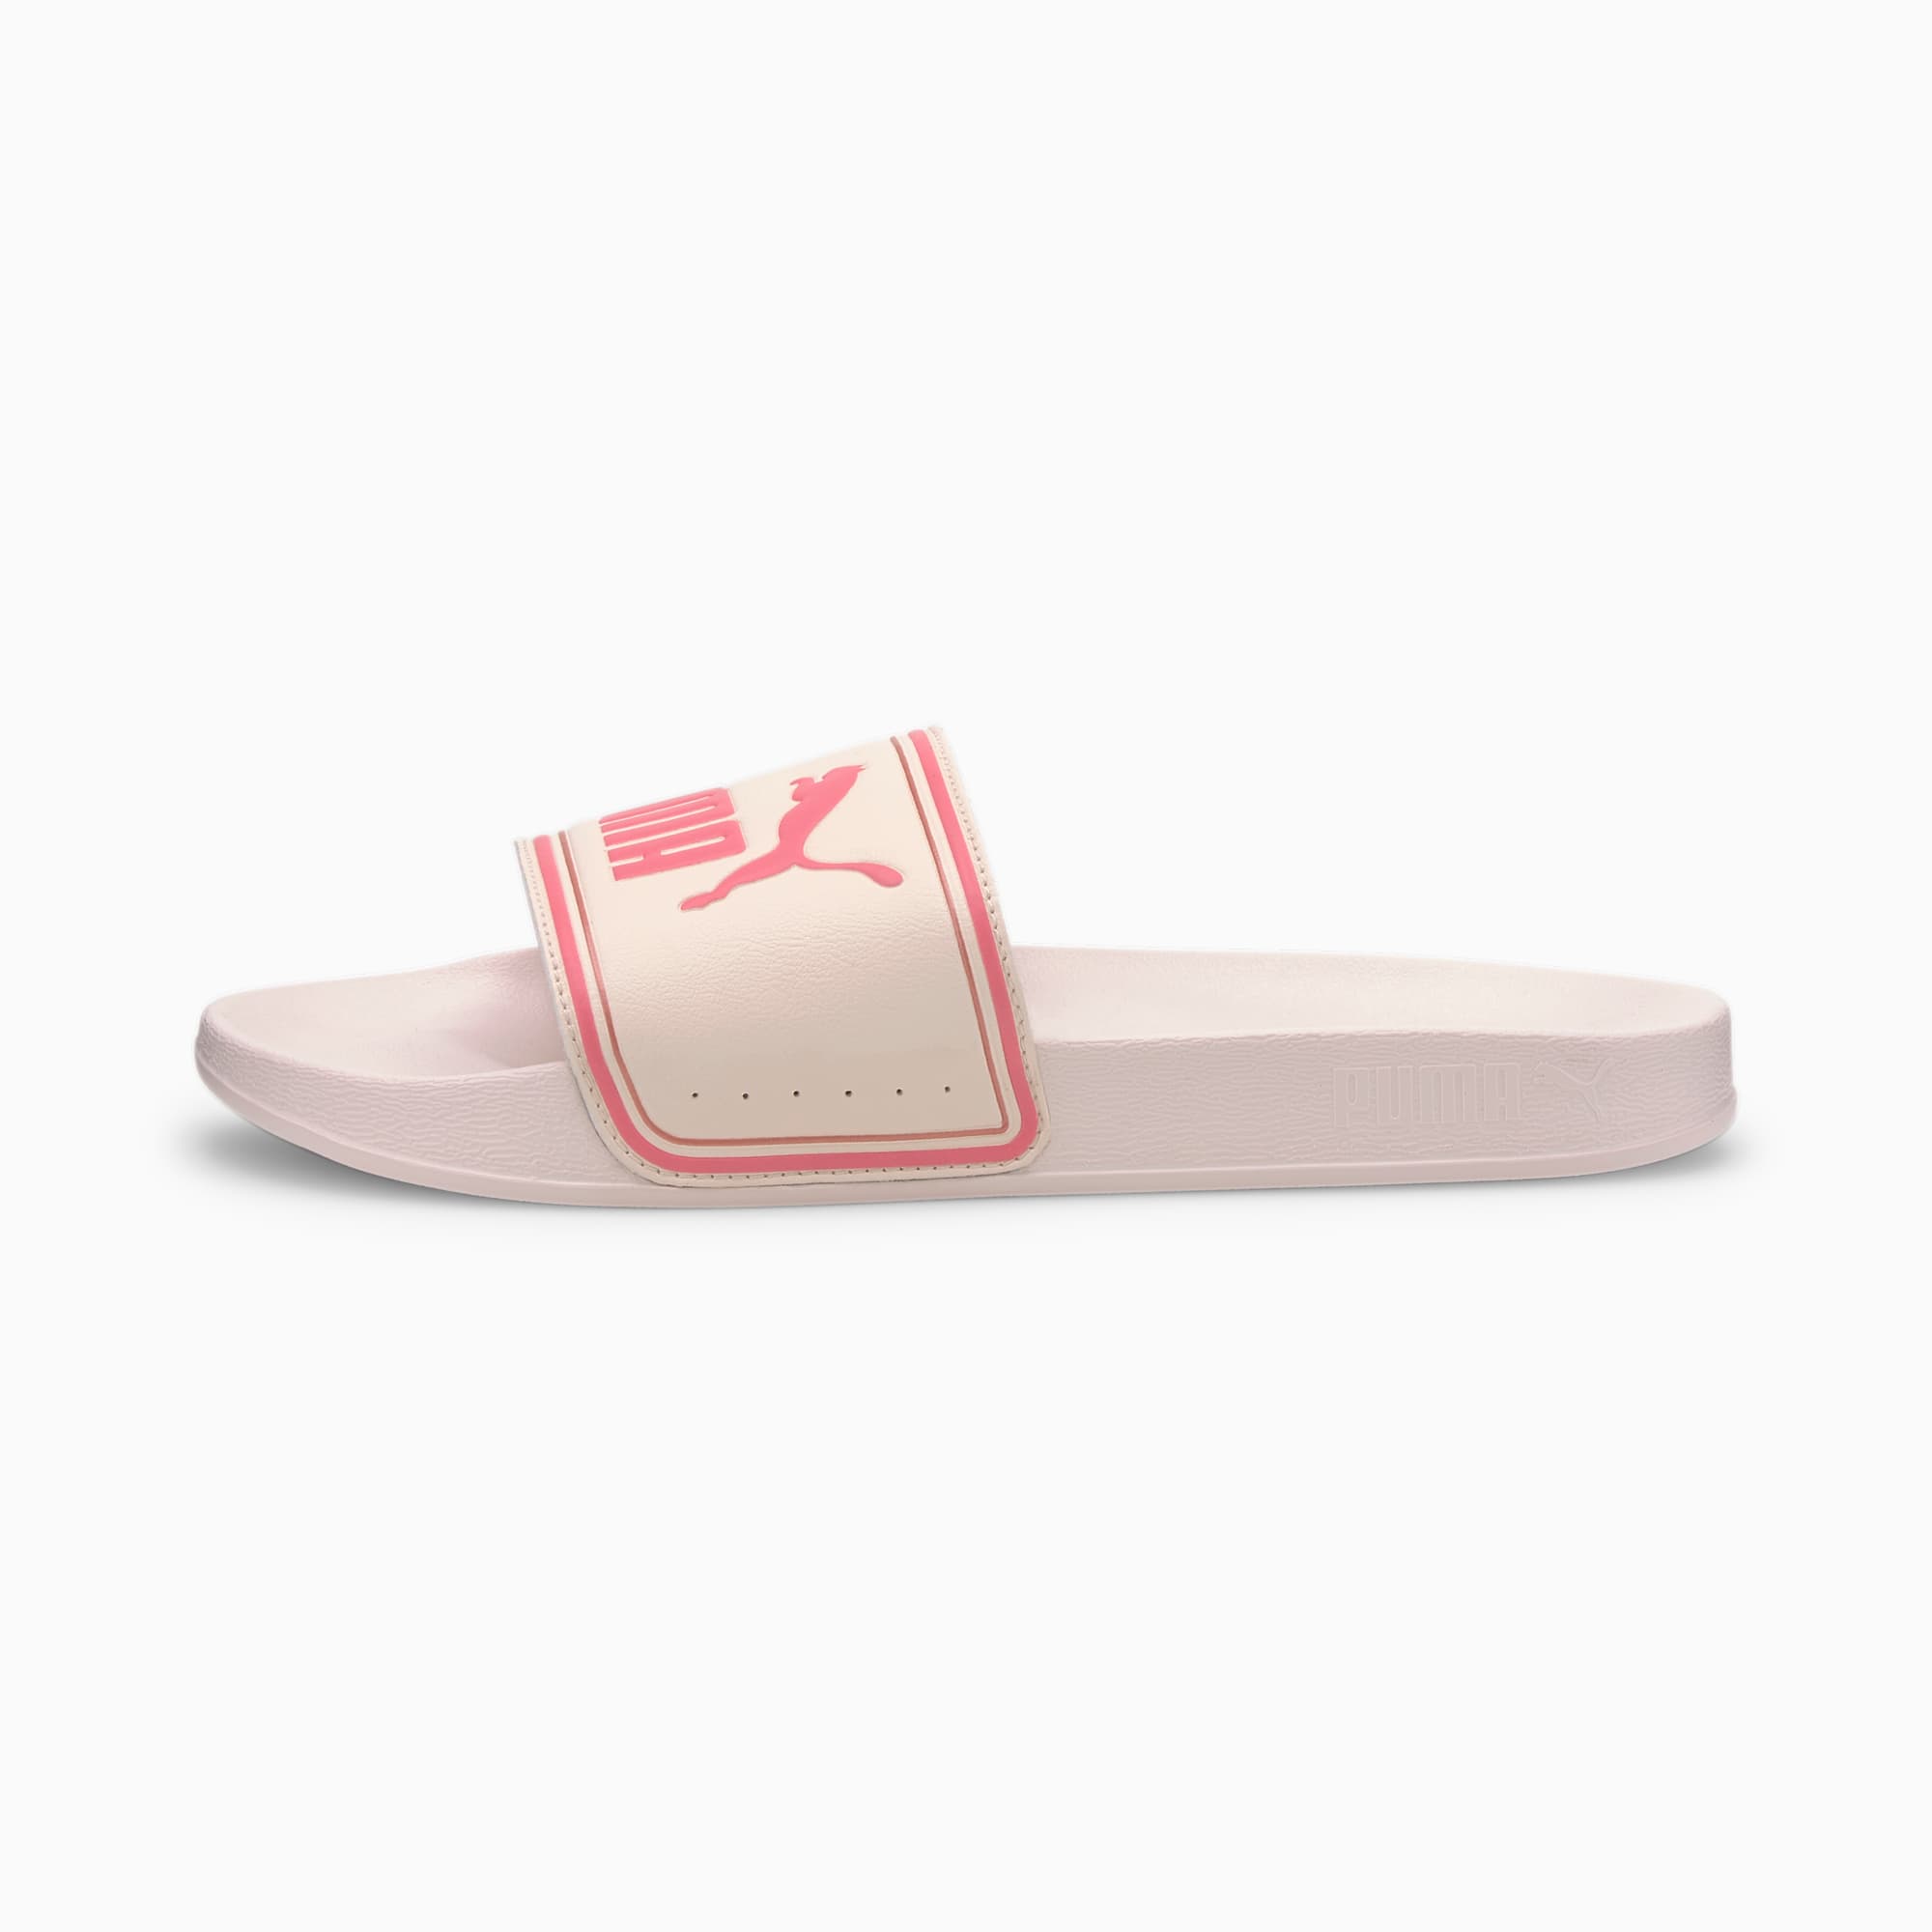 PUMA Sandale Leadcat FTR, Rose, Taille 40.5, Chaussures